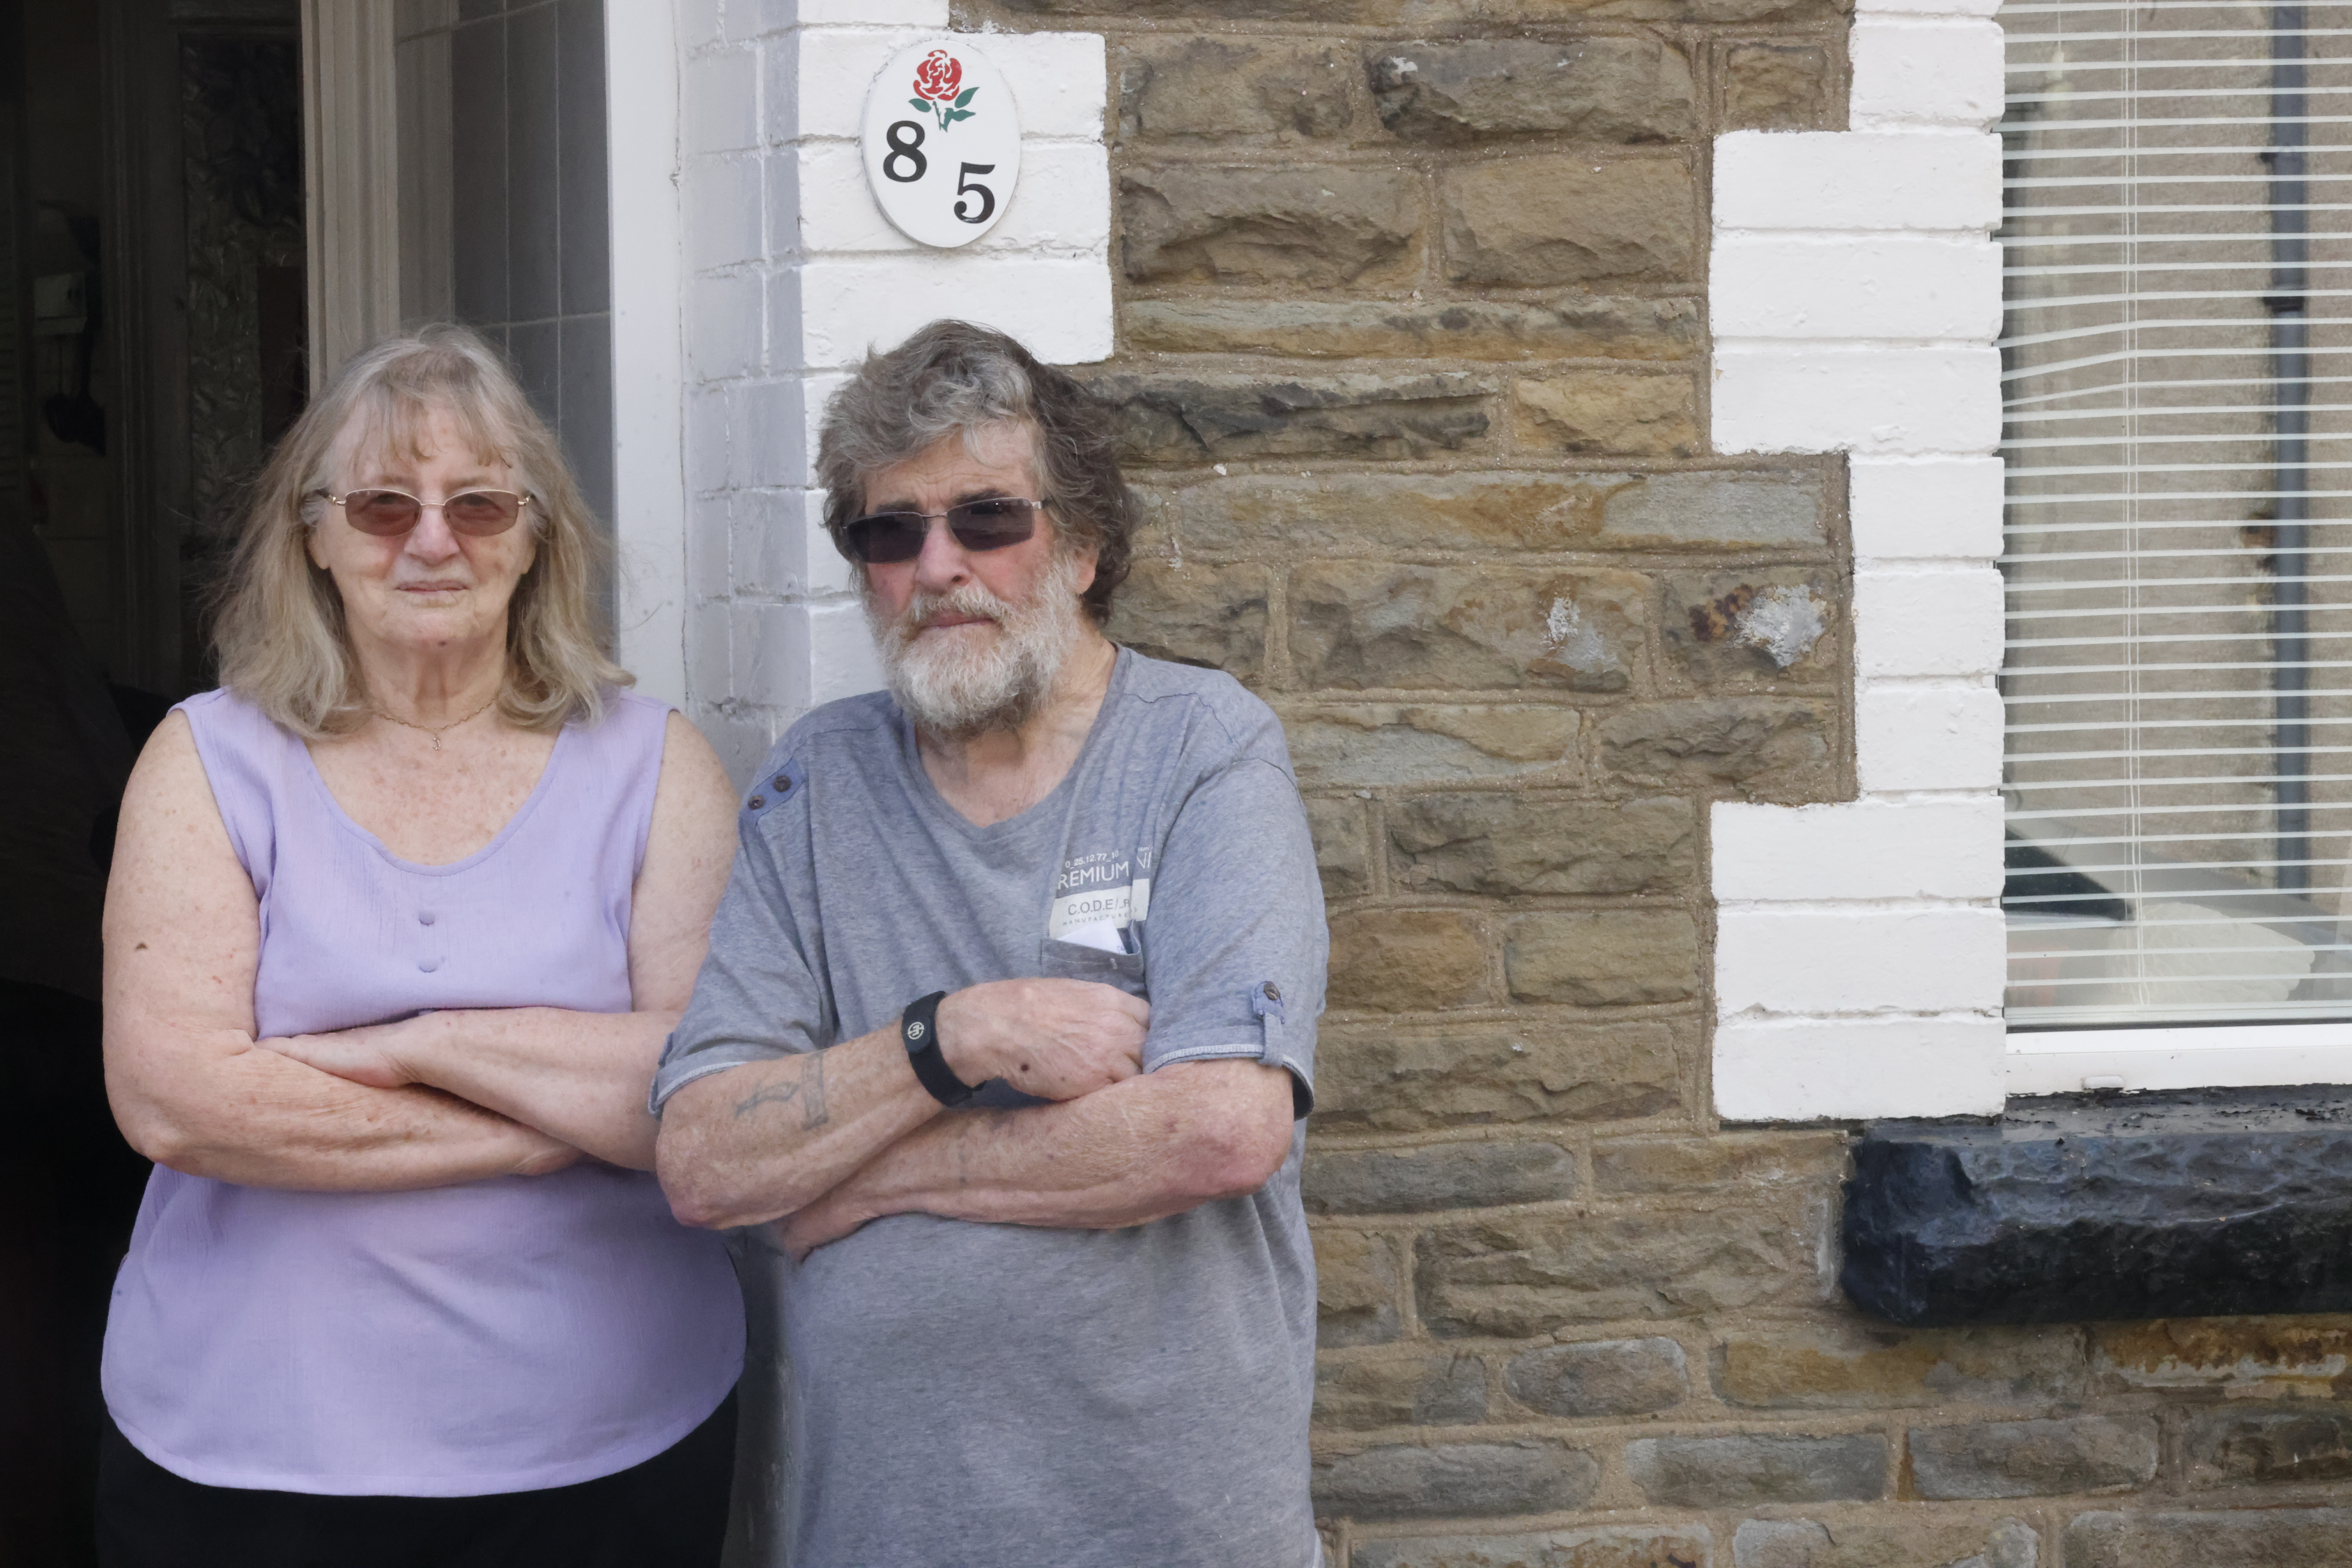 Haydn and June Yeoman were fined for parking outside their own home despite having a permit